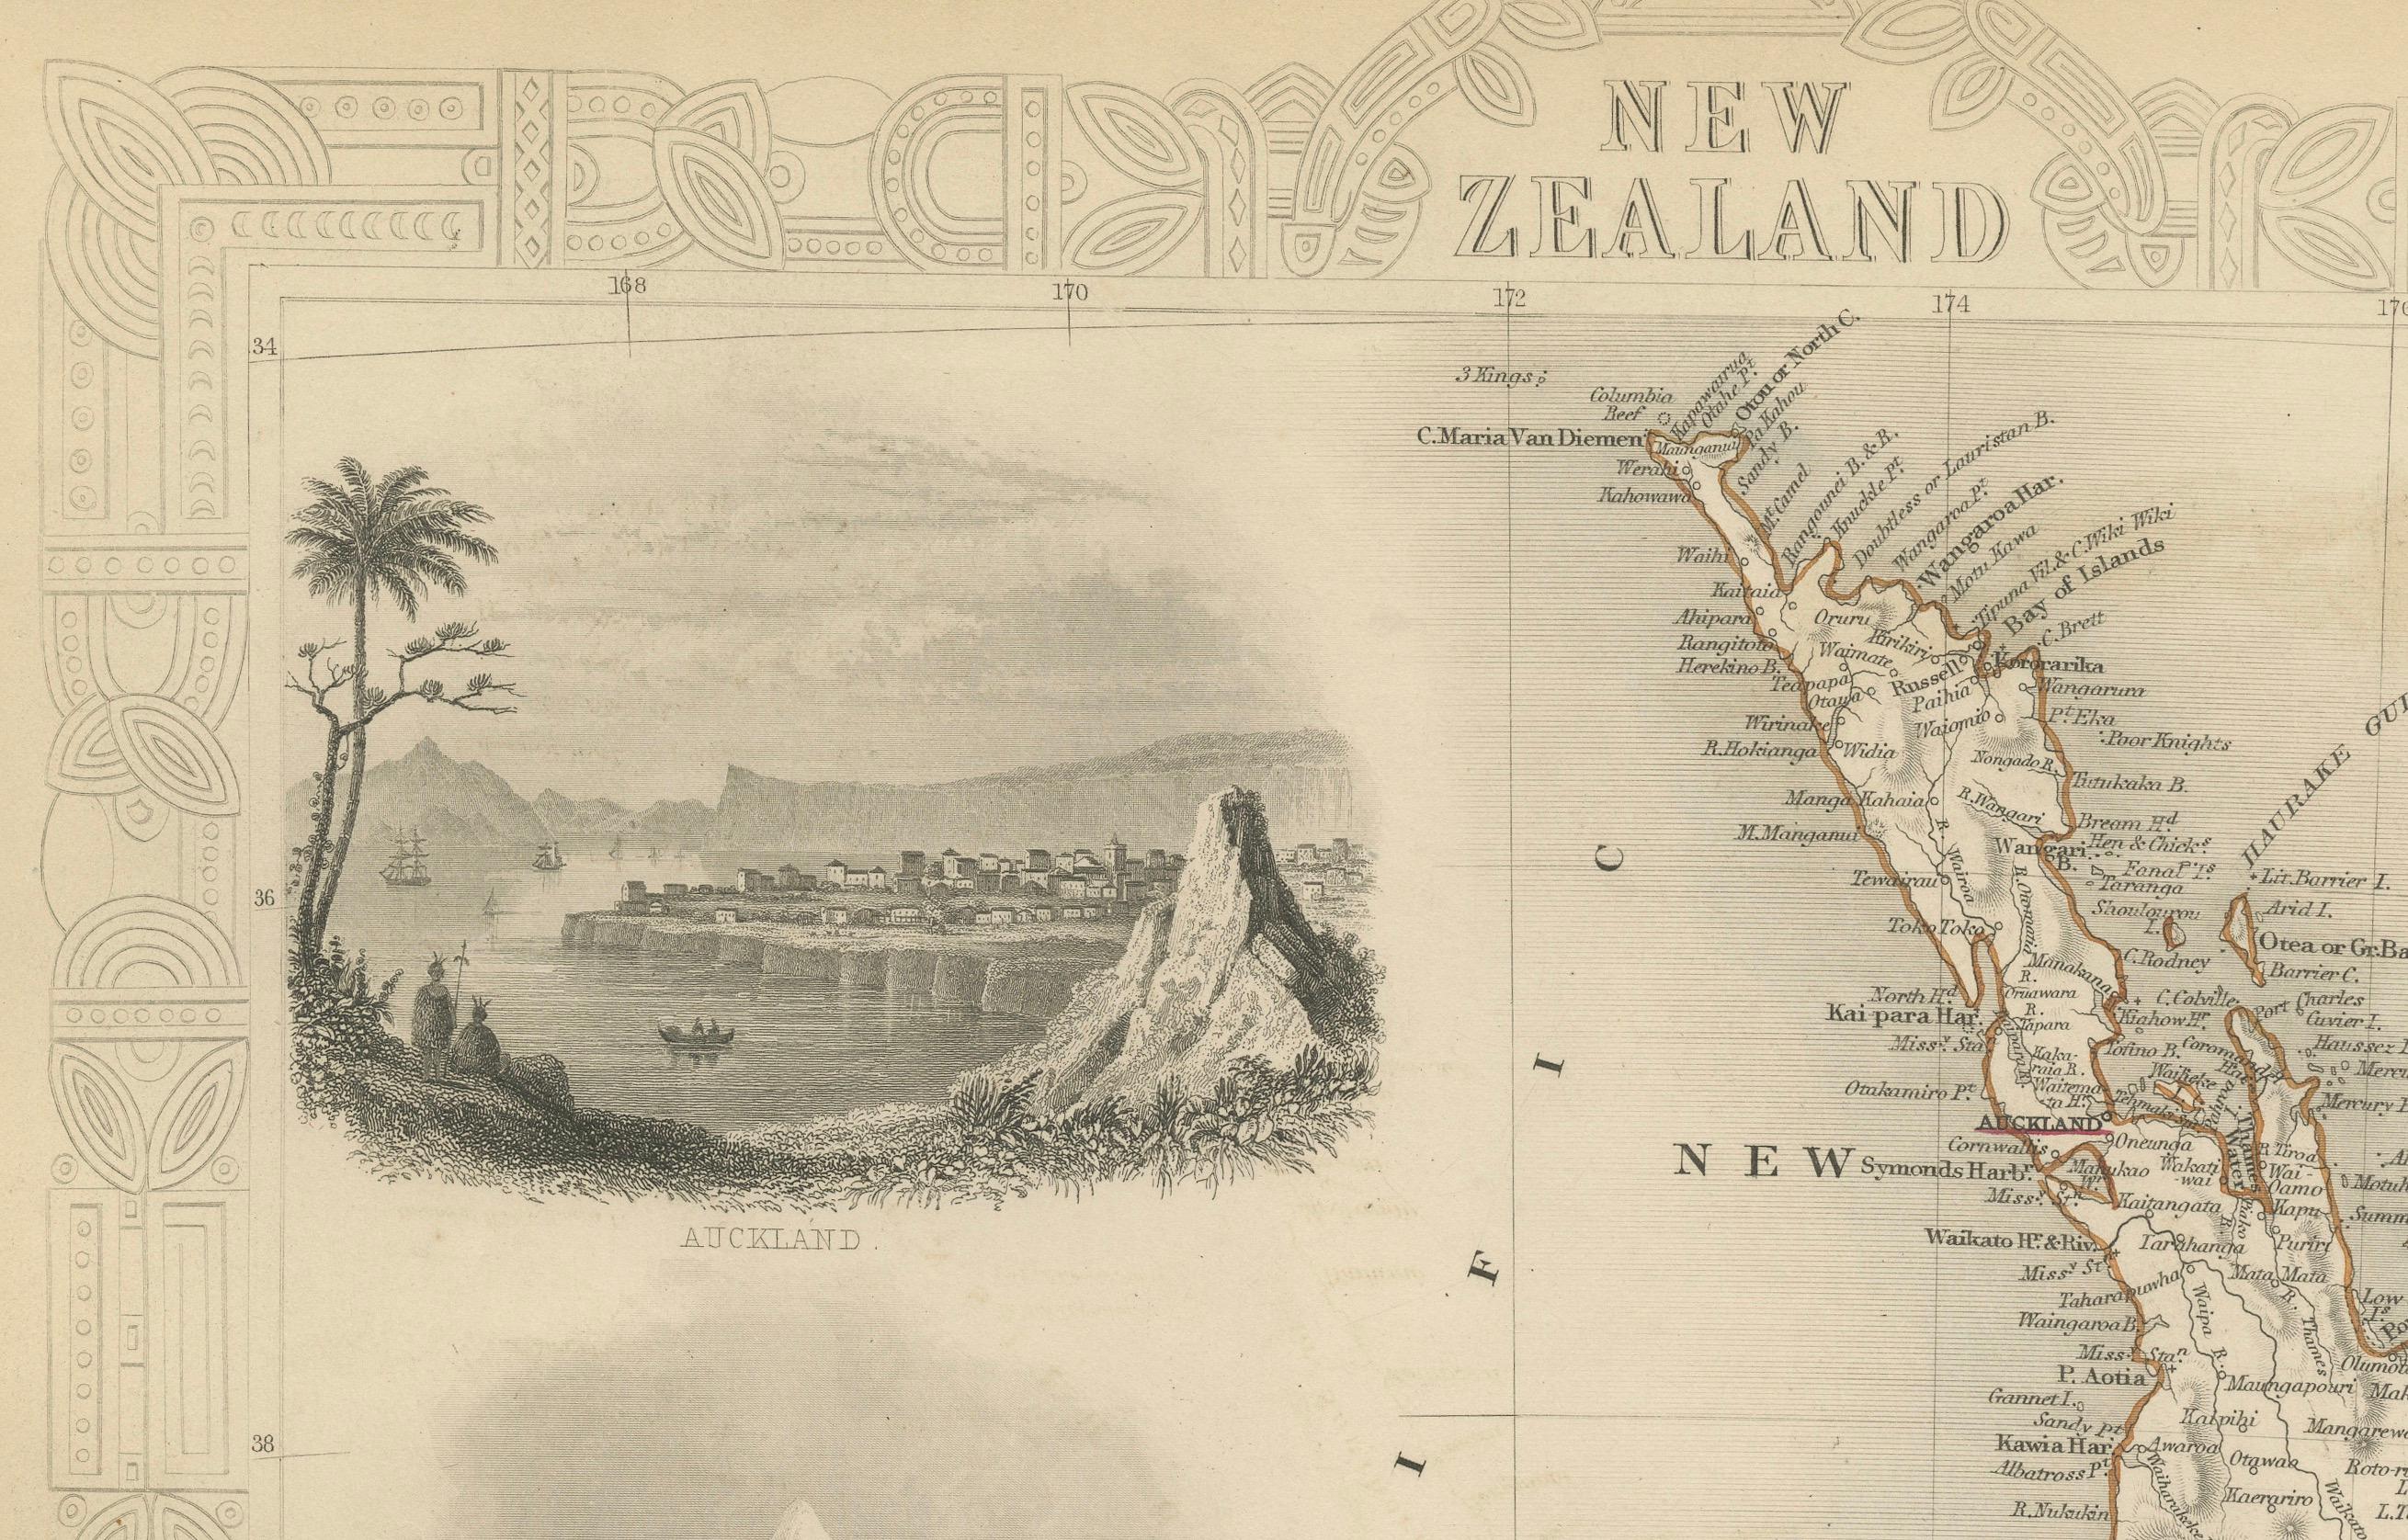 Map of New Zealand Showing Maori Culture and Early Colonial Settlements, 1851 For Sale 1